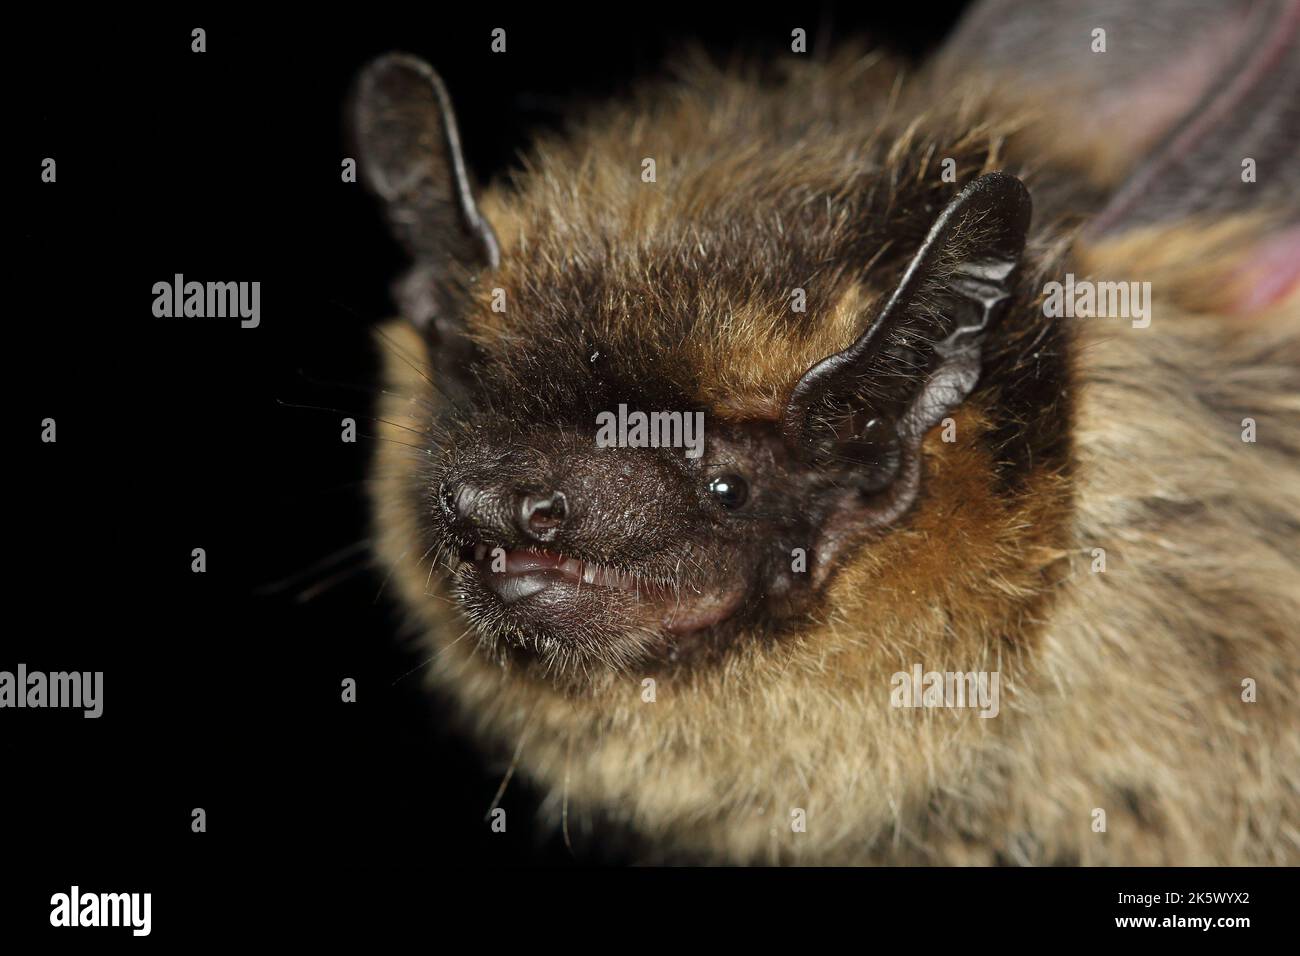 The northern bat (Eptesicus nilssonii) head detail in a natural habitat Stock Photo